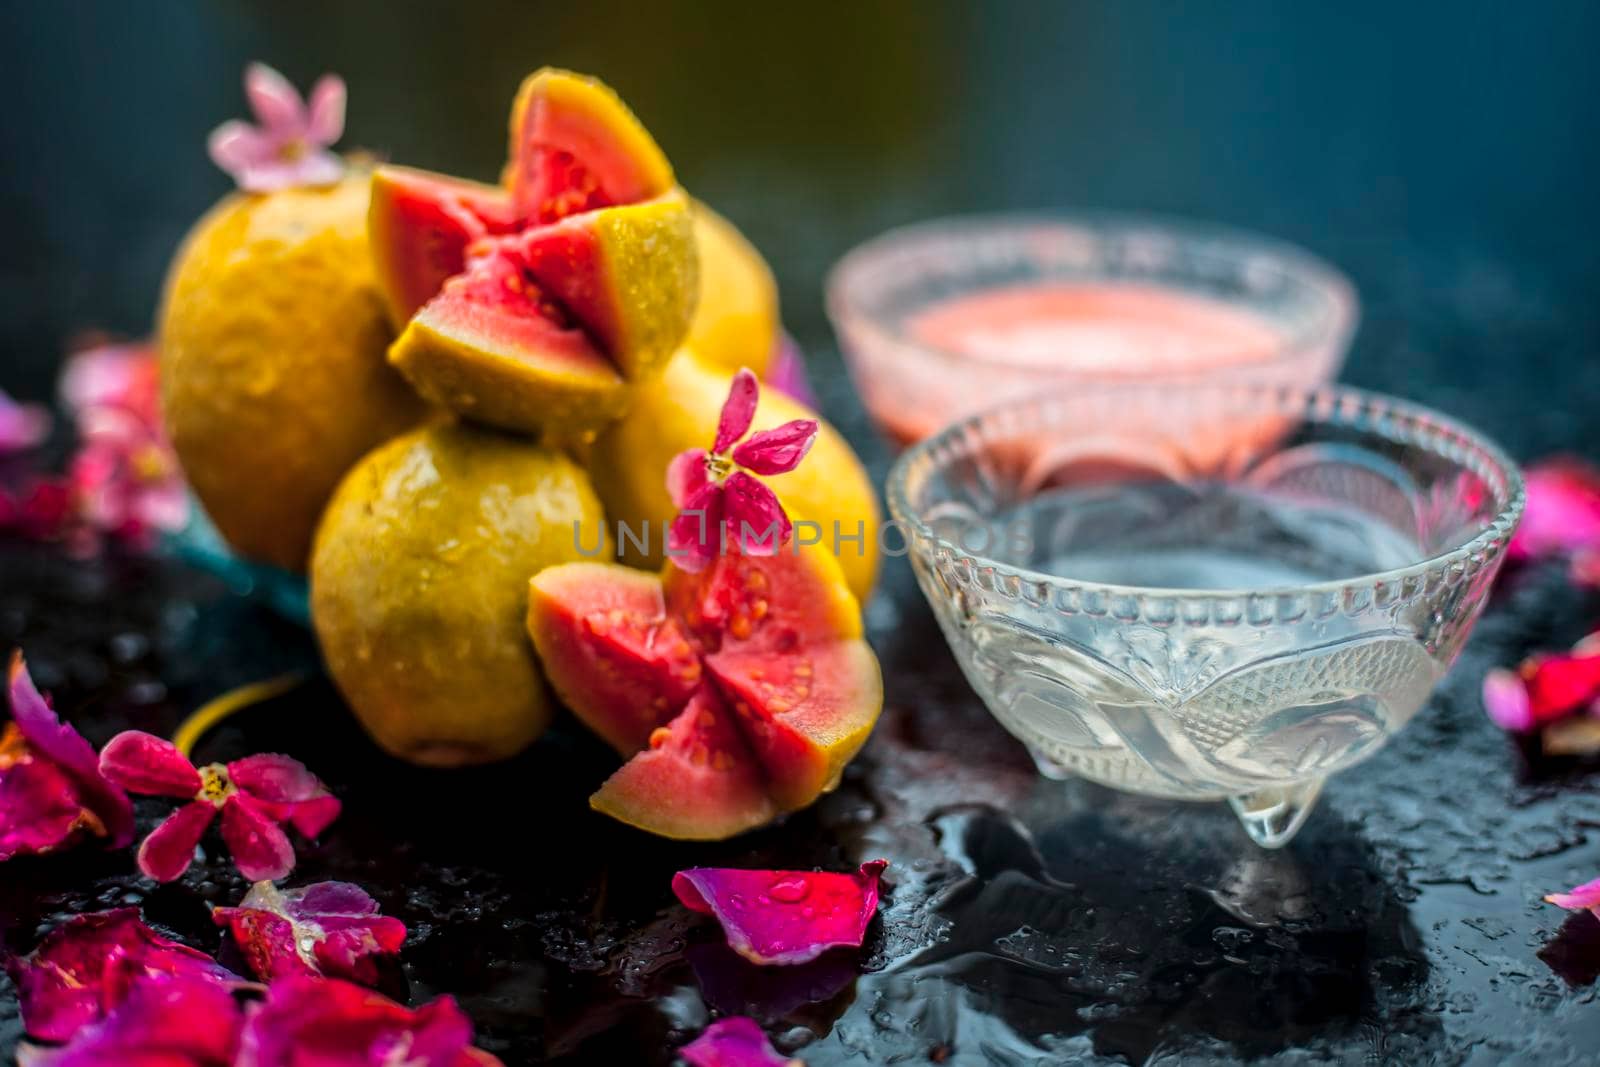 Guava pulp and water well mixed in a glass bowl on the wooden surface along with some raw cut guava, with some rose petals, also completing a face mask used for a natural glow. by mirzamlk